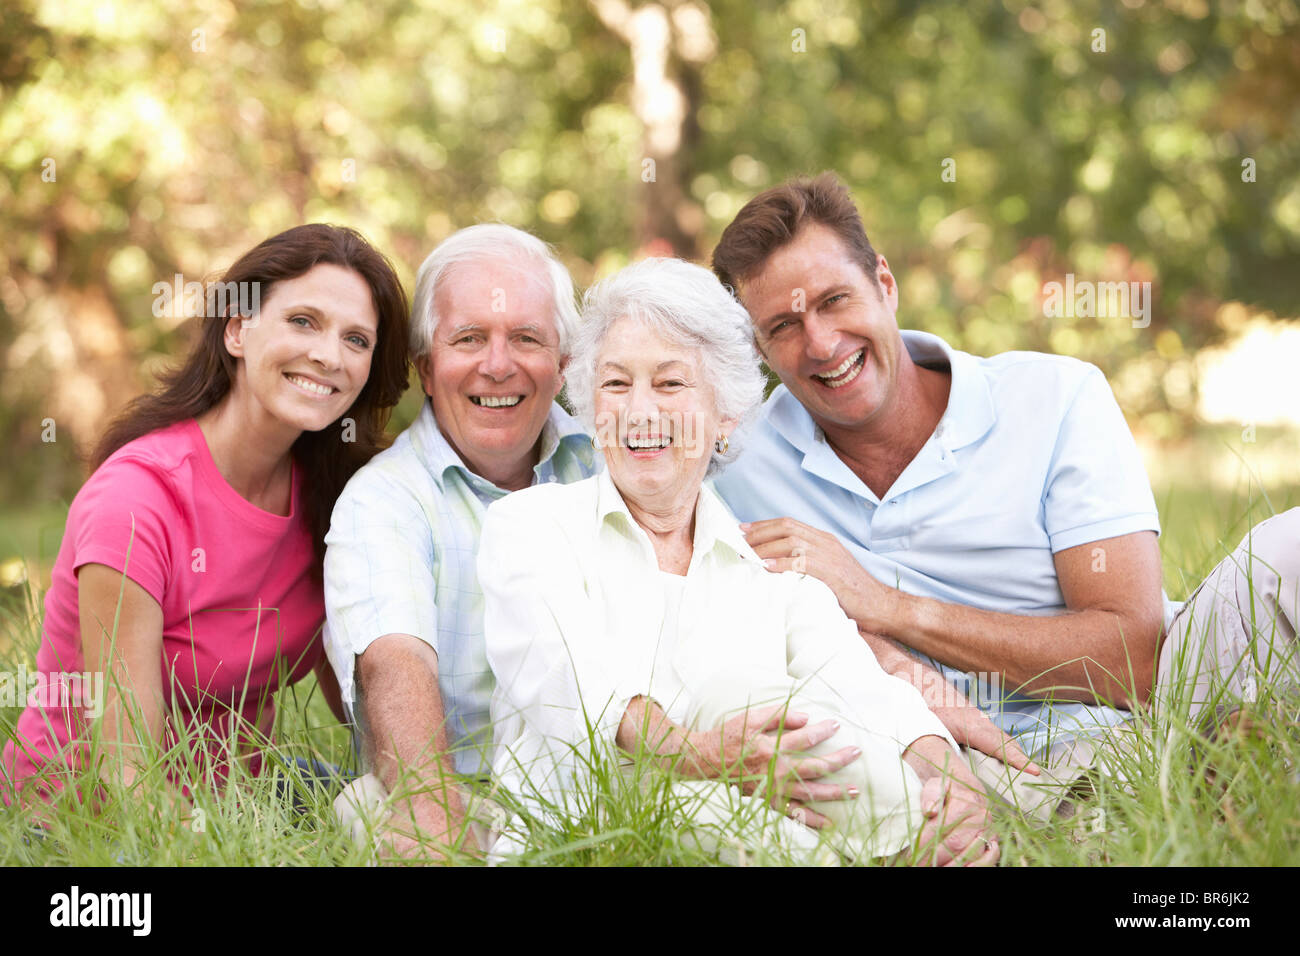 Senior Couple With Grown Up Children In Park Stock Photo